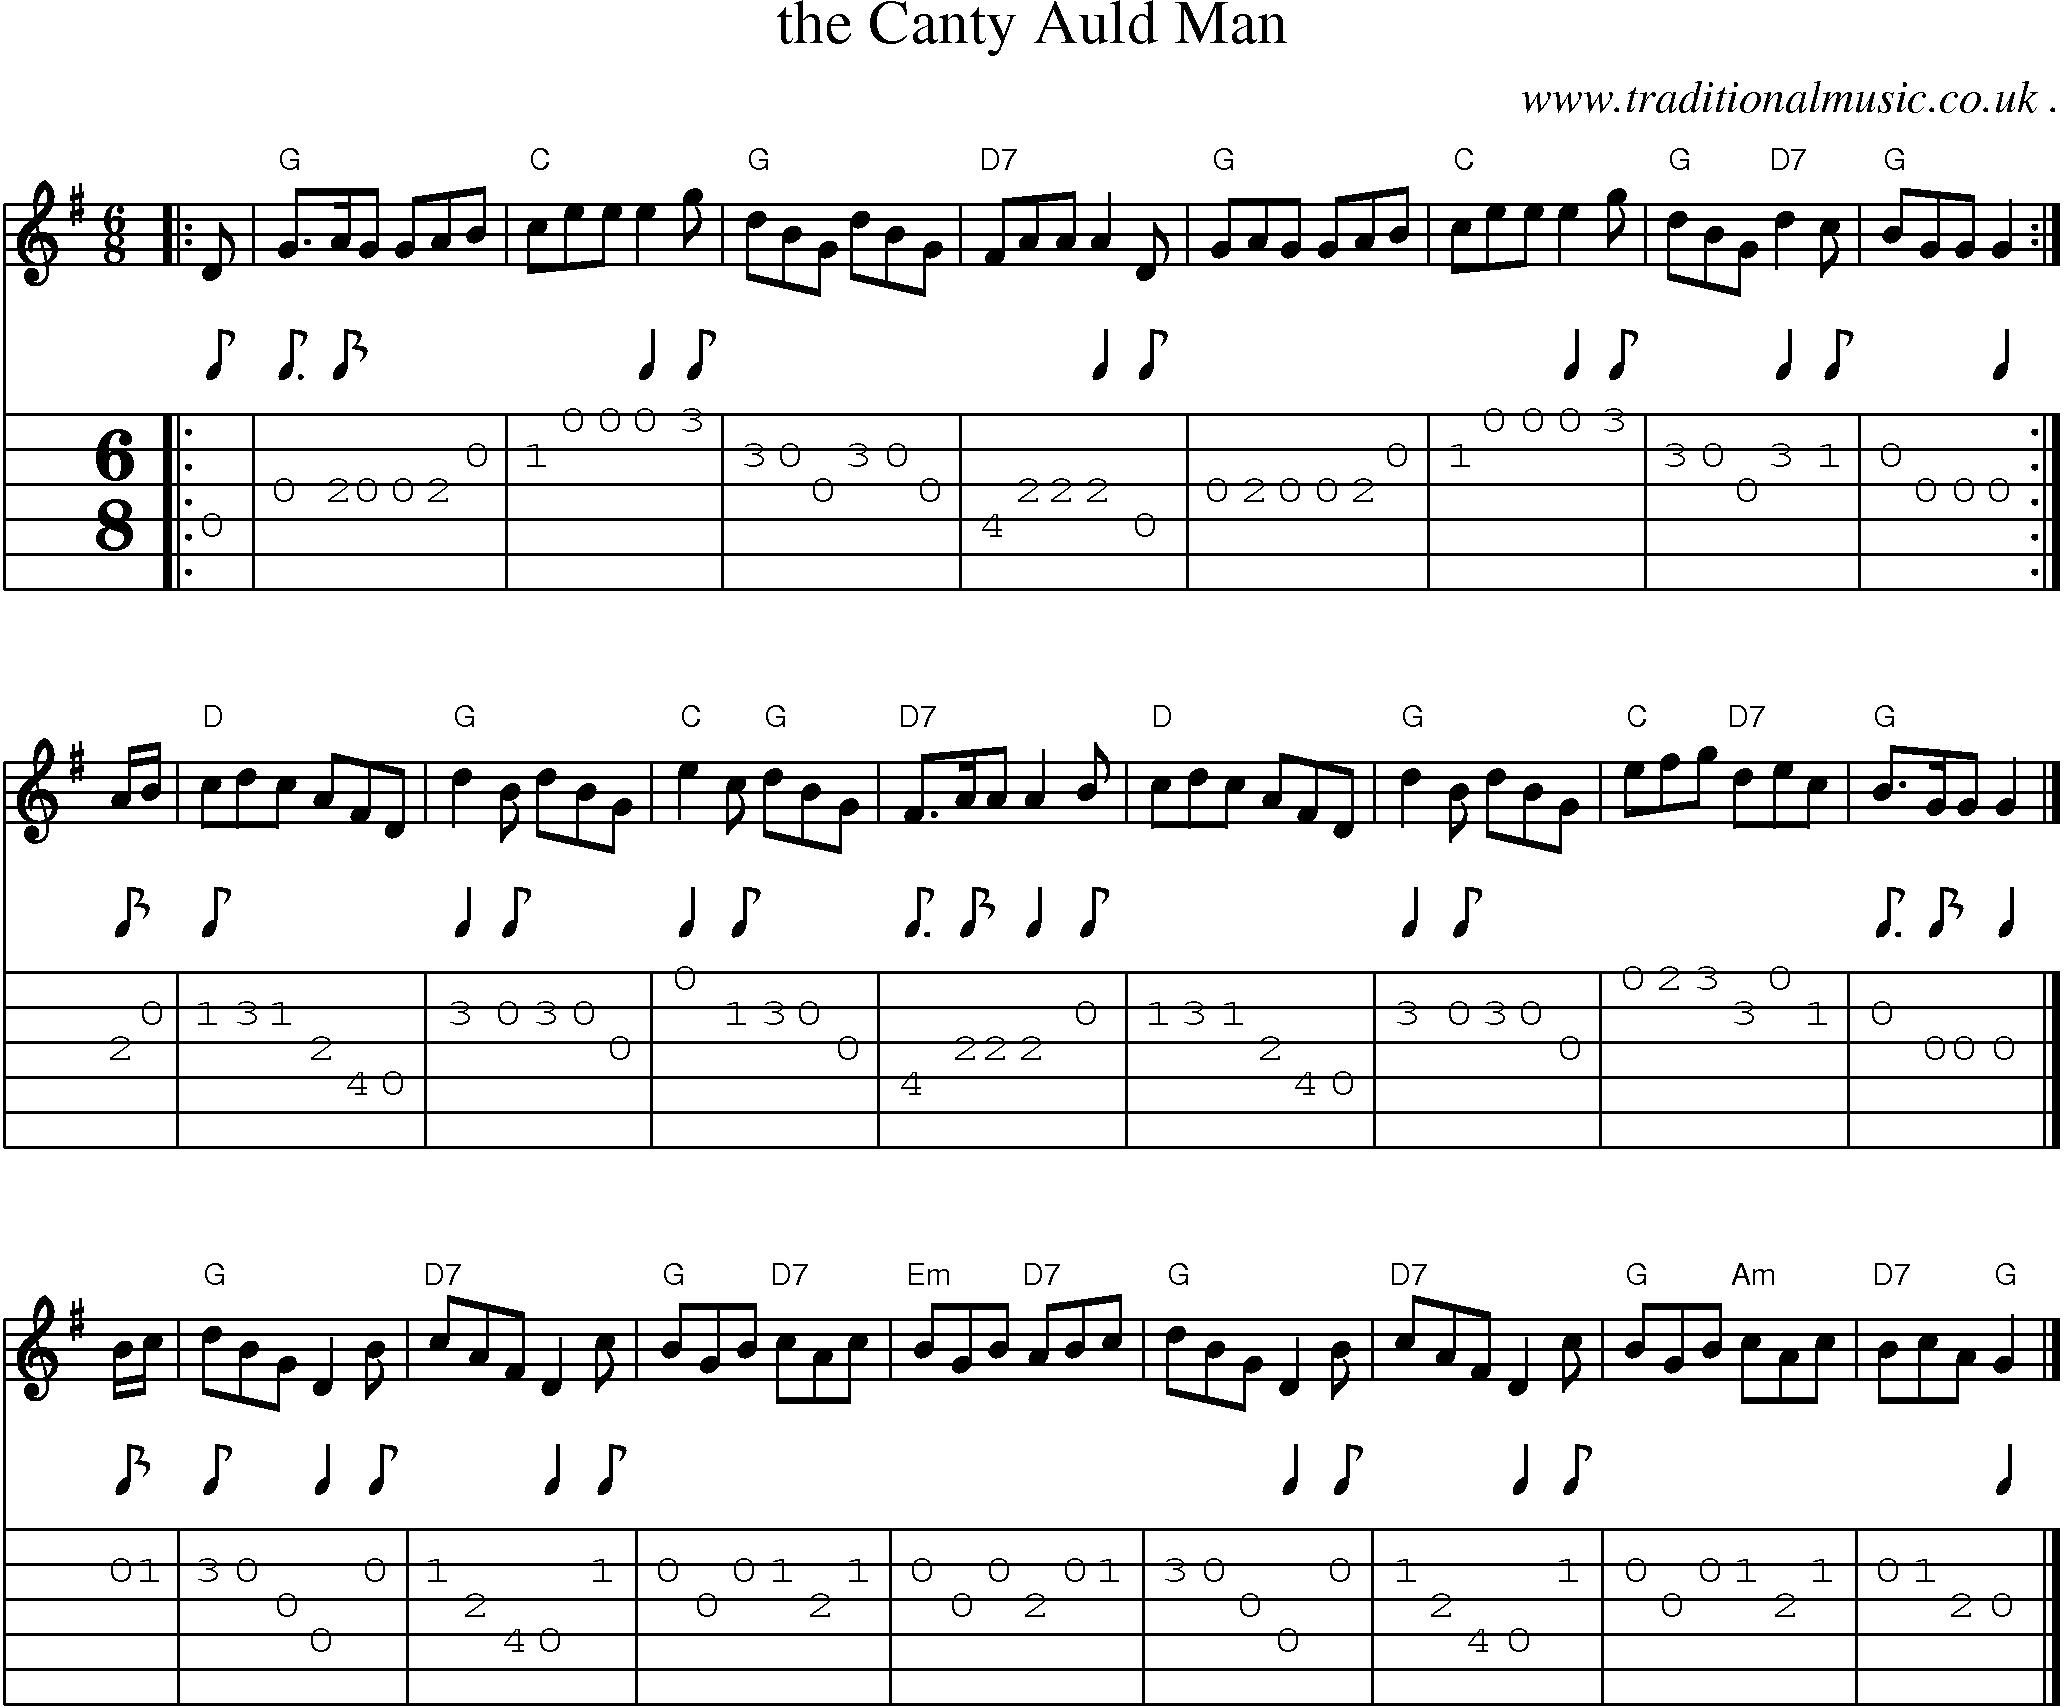 Sheet-music  score, Chords and Guitar Tabs for The Canty Auld Man